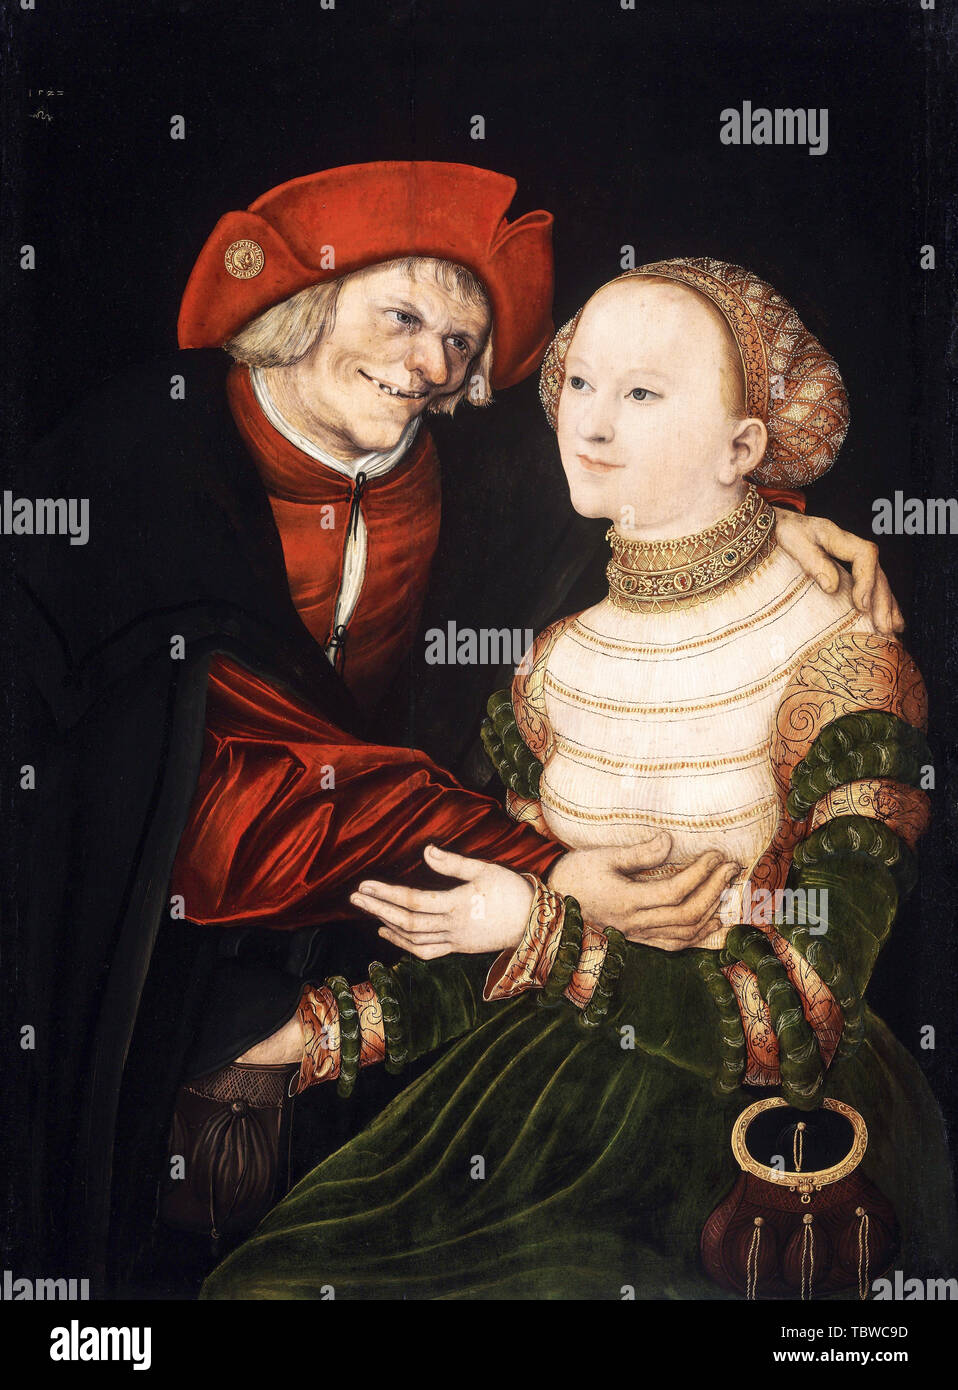 Lucas Cranach the Elder, The Ill-Matched Couple, Old man and young woman, portrait painting, 1522 Stock Photo